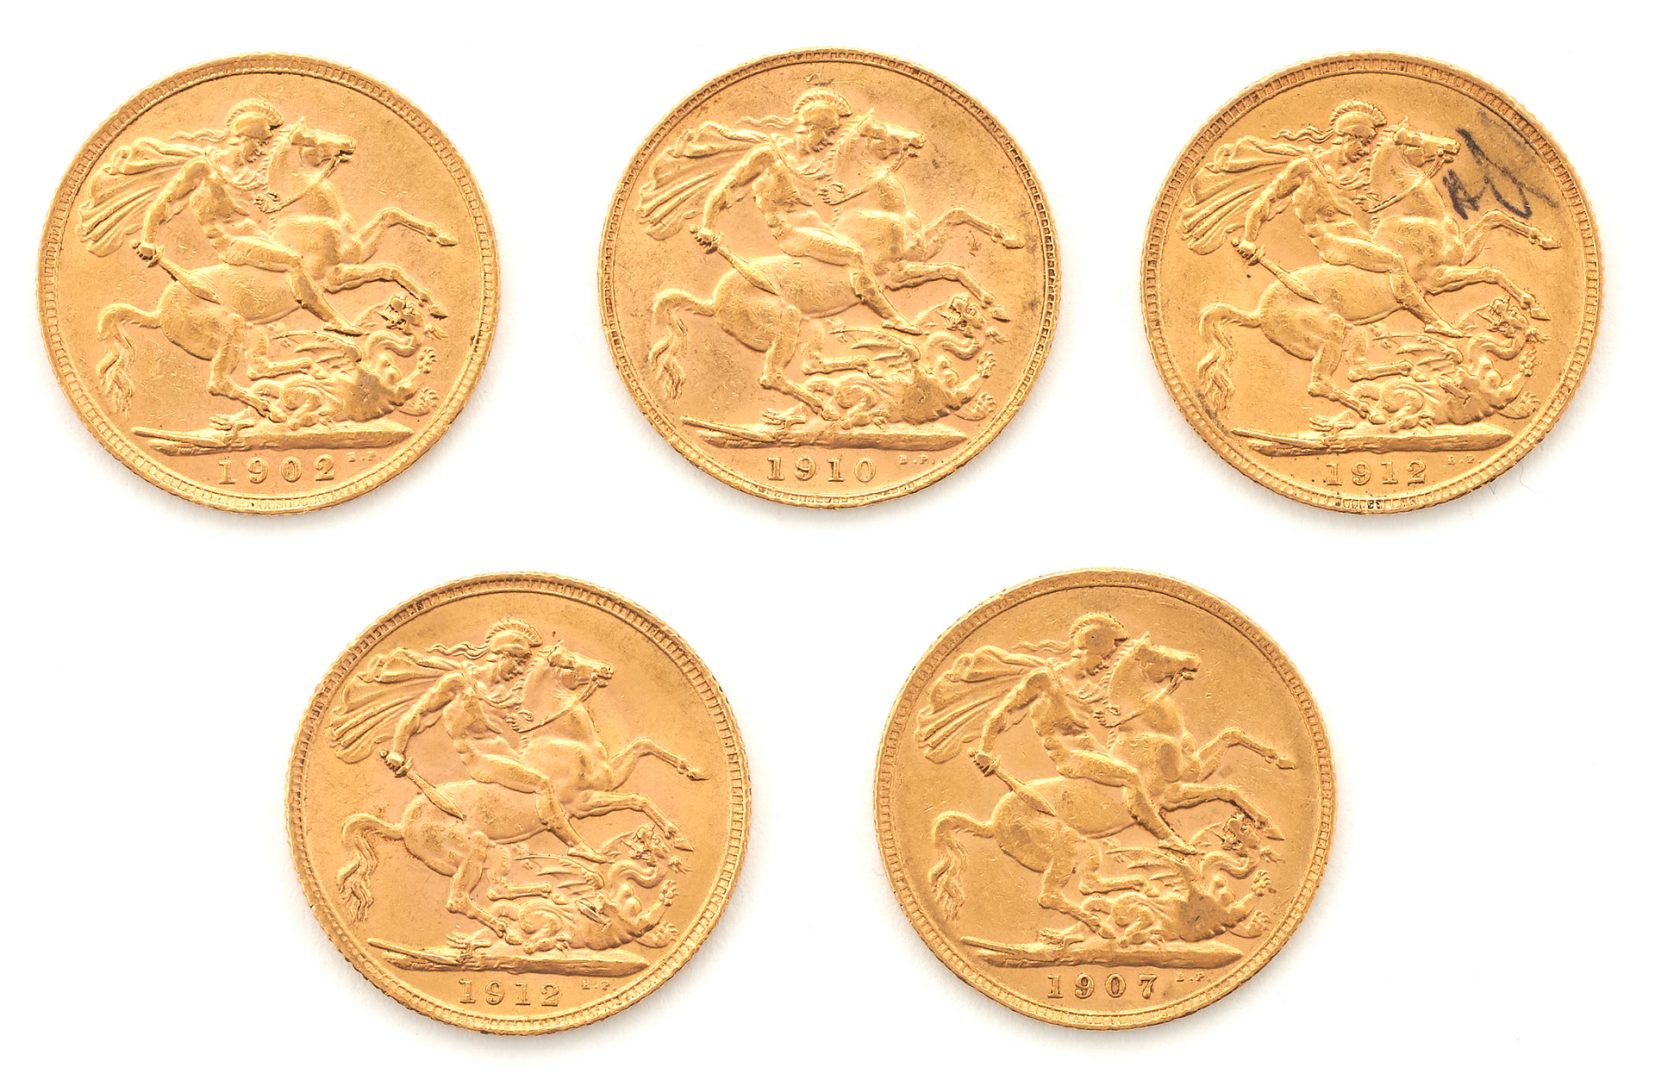 Lot 237: 5 English Gold Sovereigns, 1902-1912